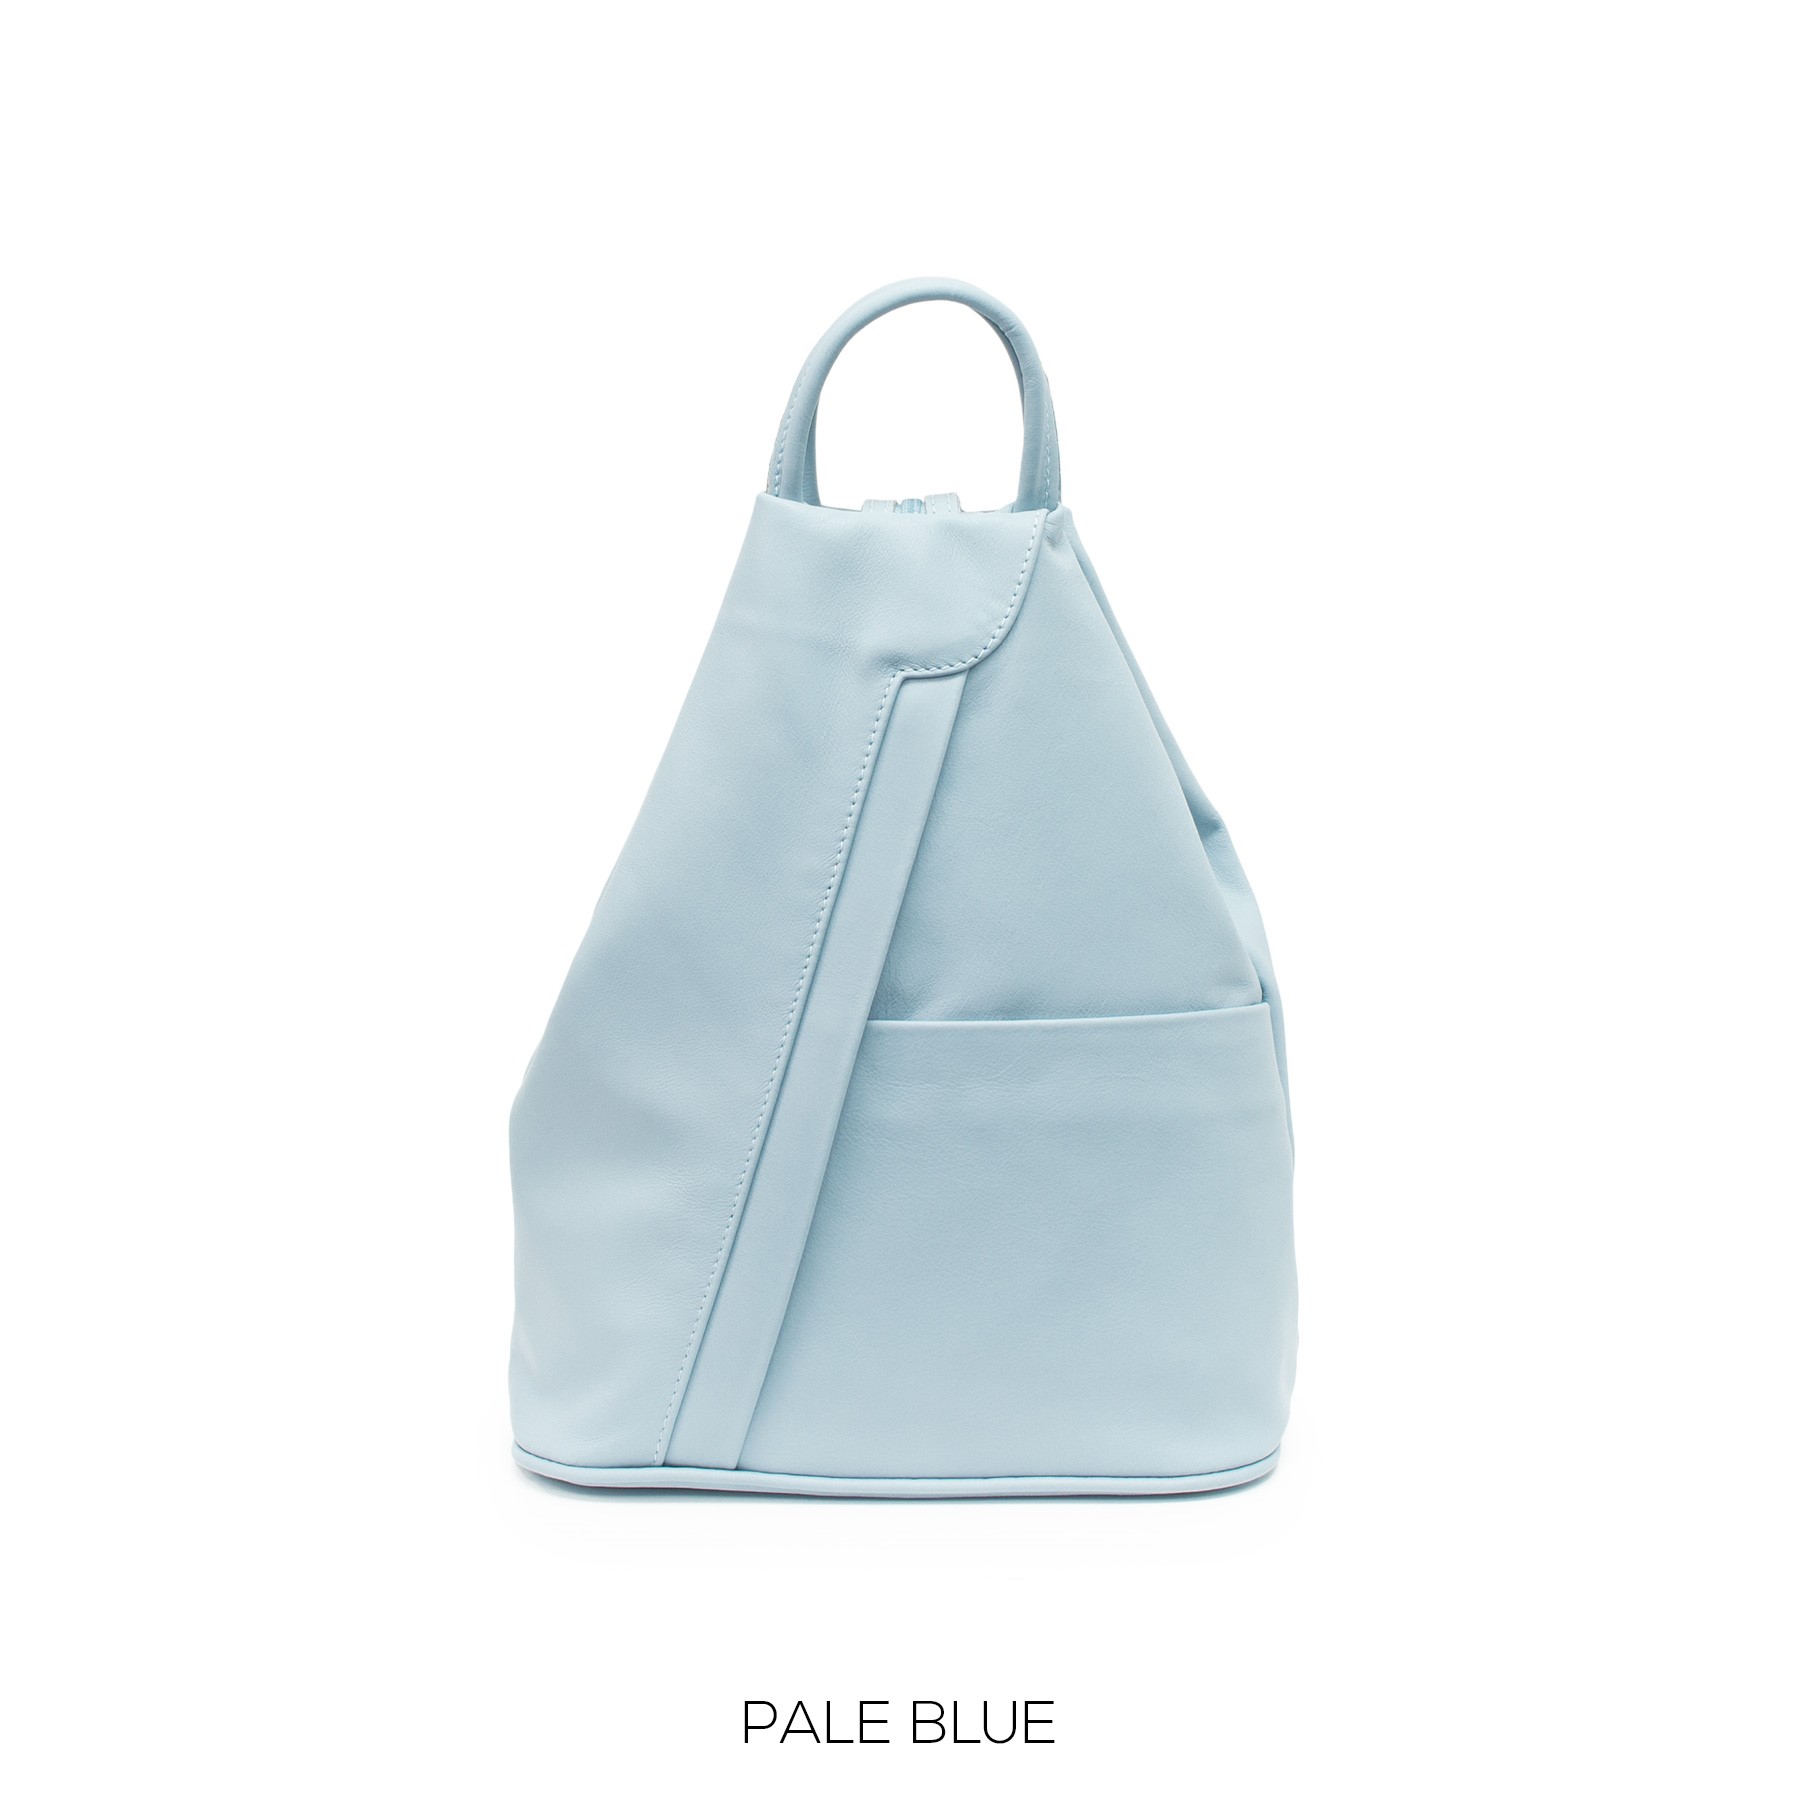 Leather Triangular Backpack Pale Blue - The Finishing Touch, Abingdon ...